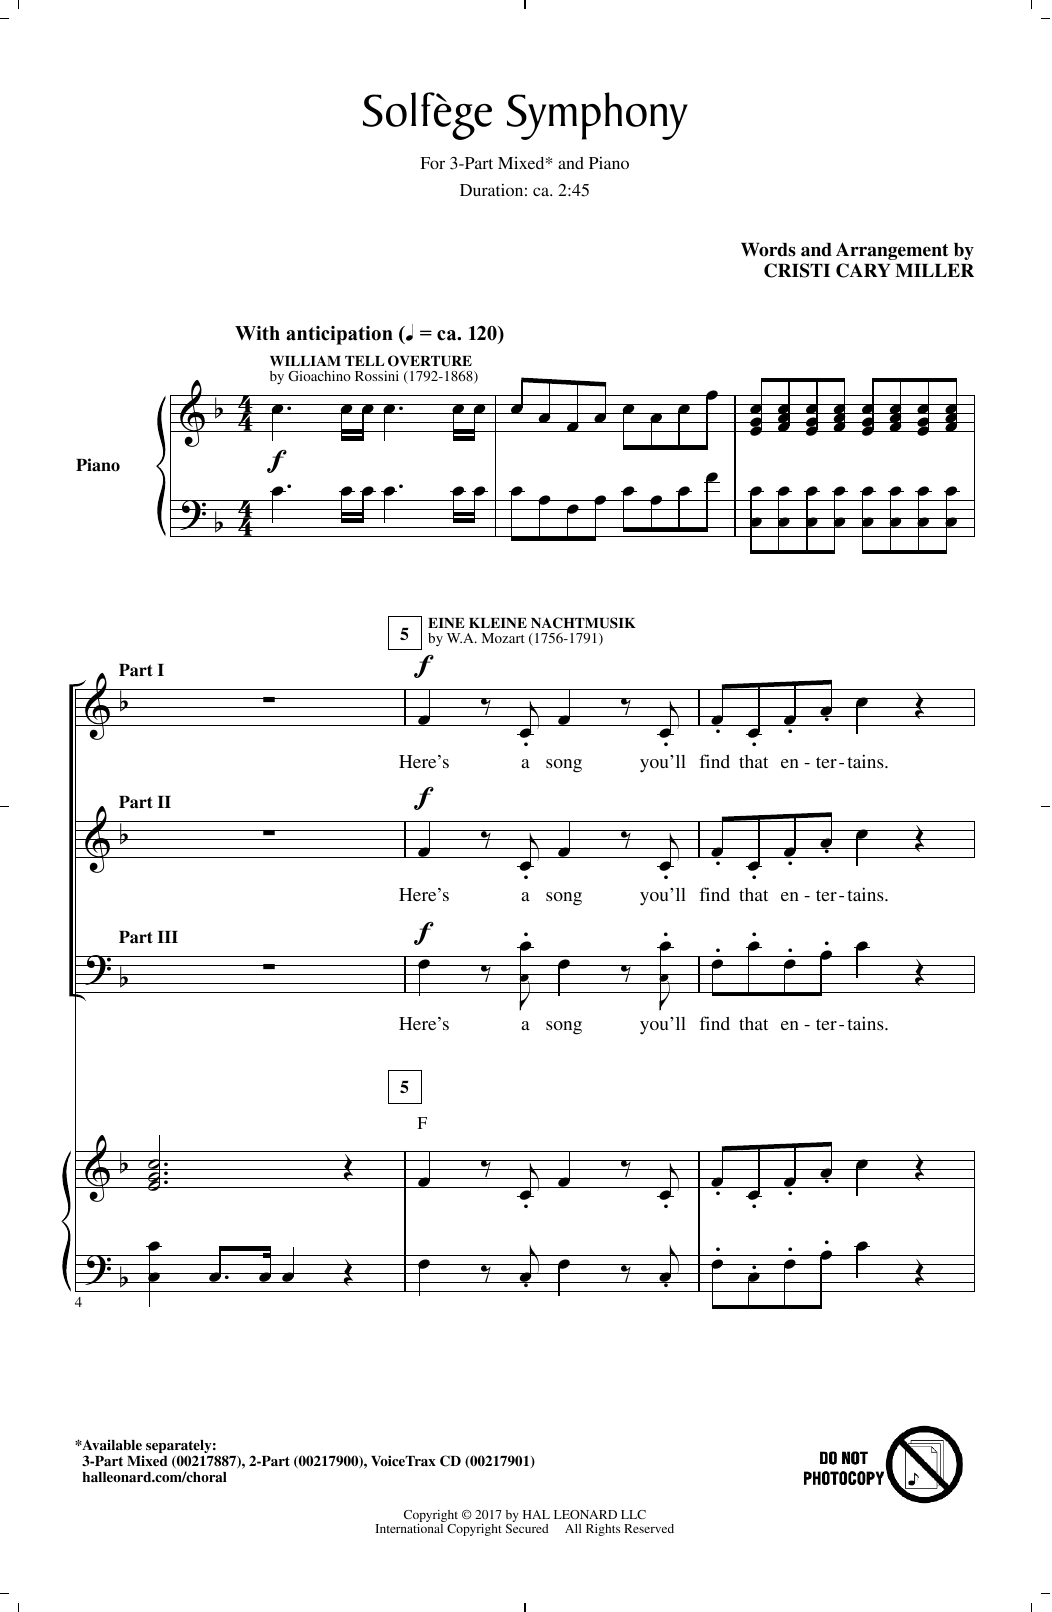 Download Cristi Cary Miller Solfege Symphony Sheet Music